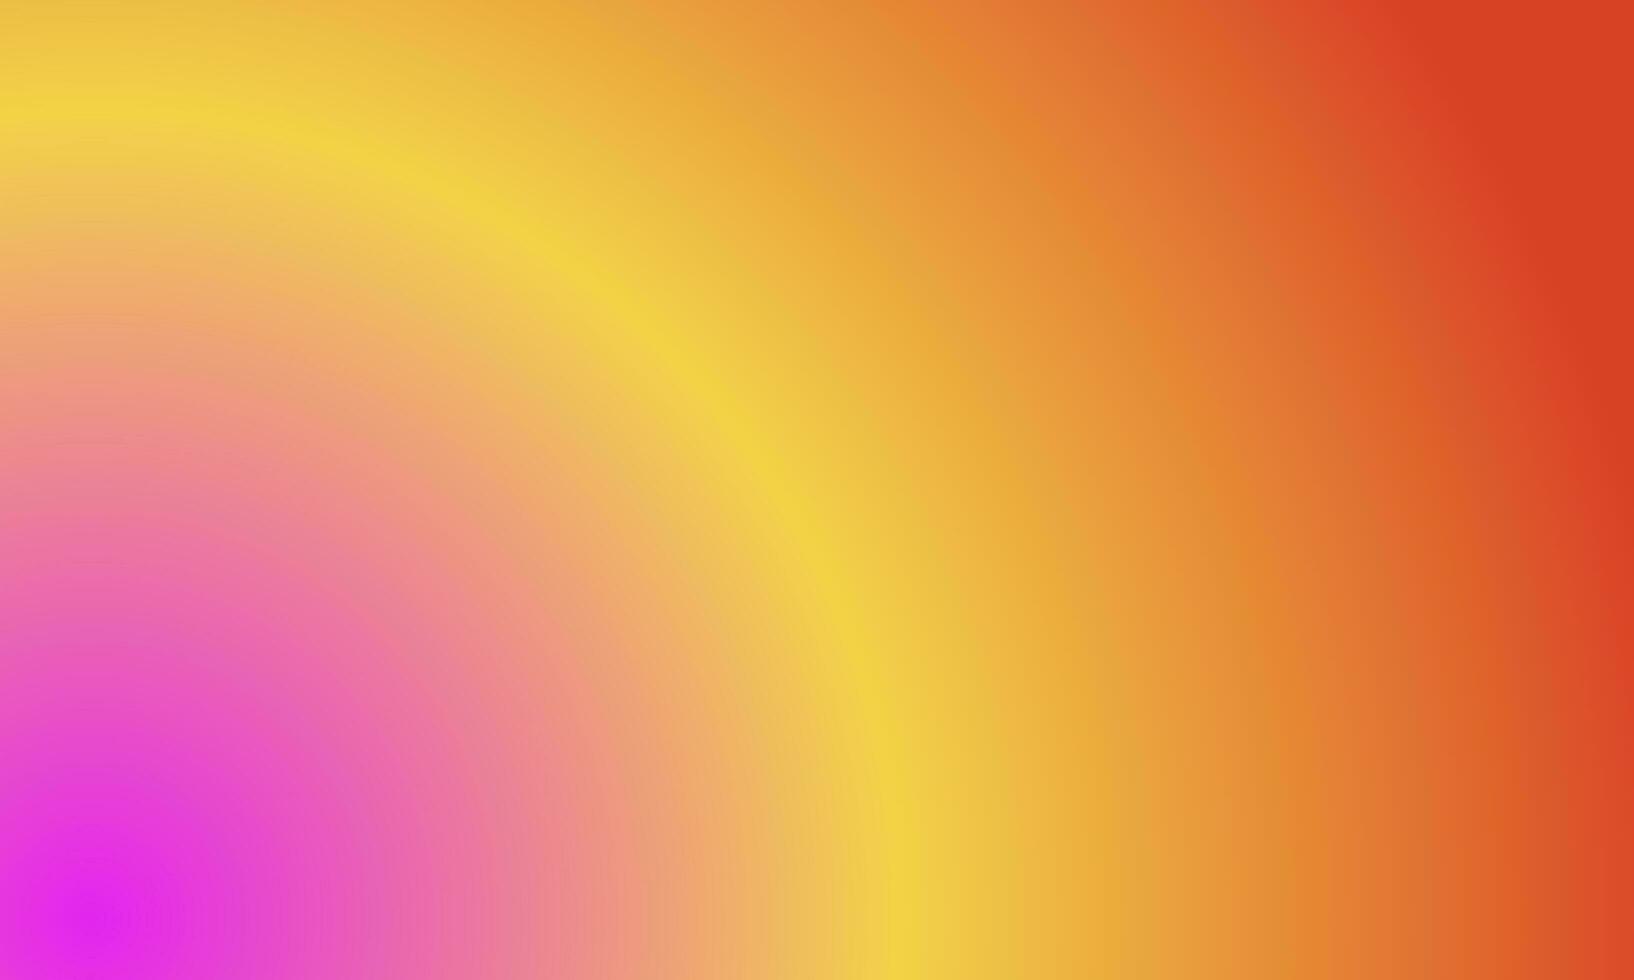 Design simple pink,yellow and red gradient color illustration background photo